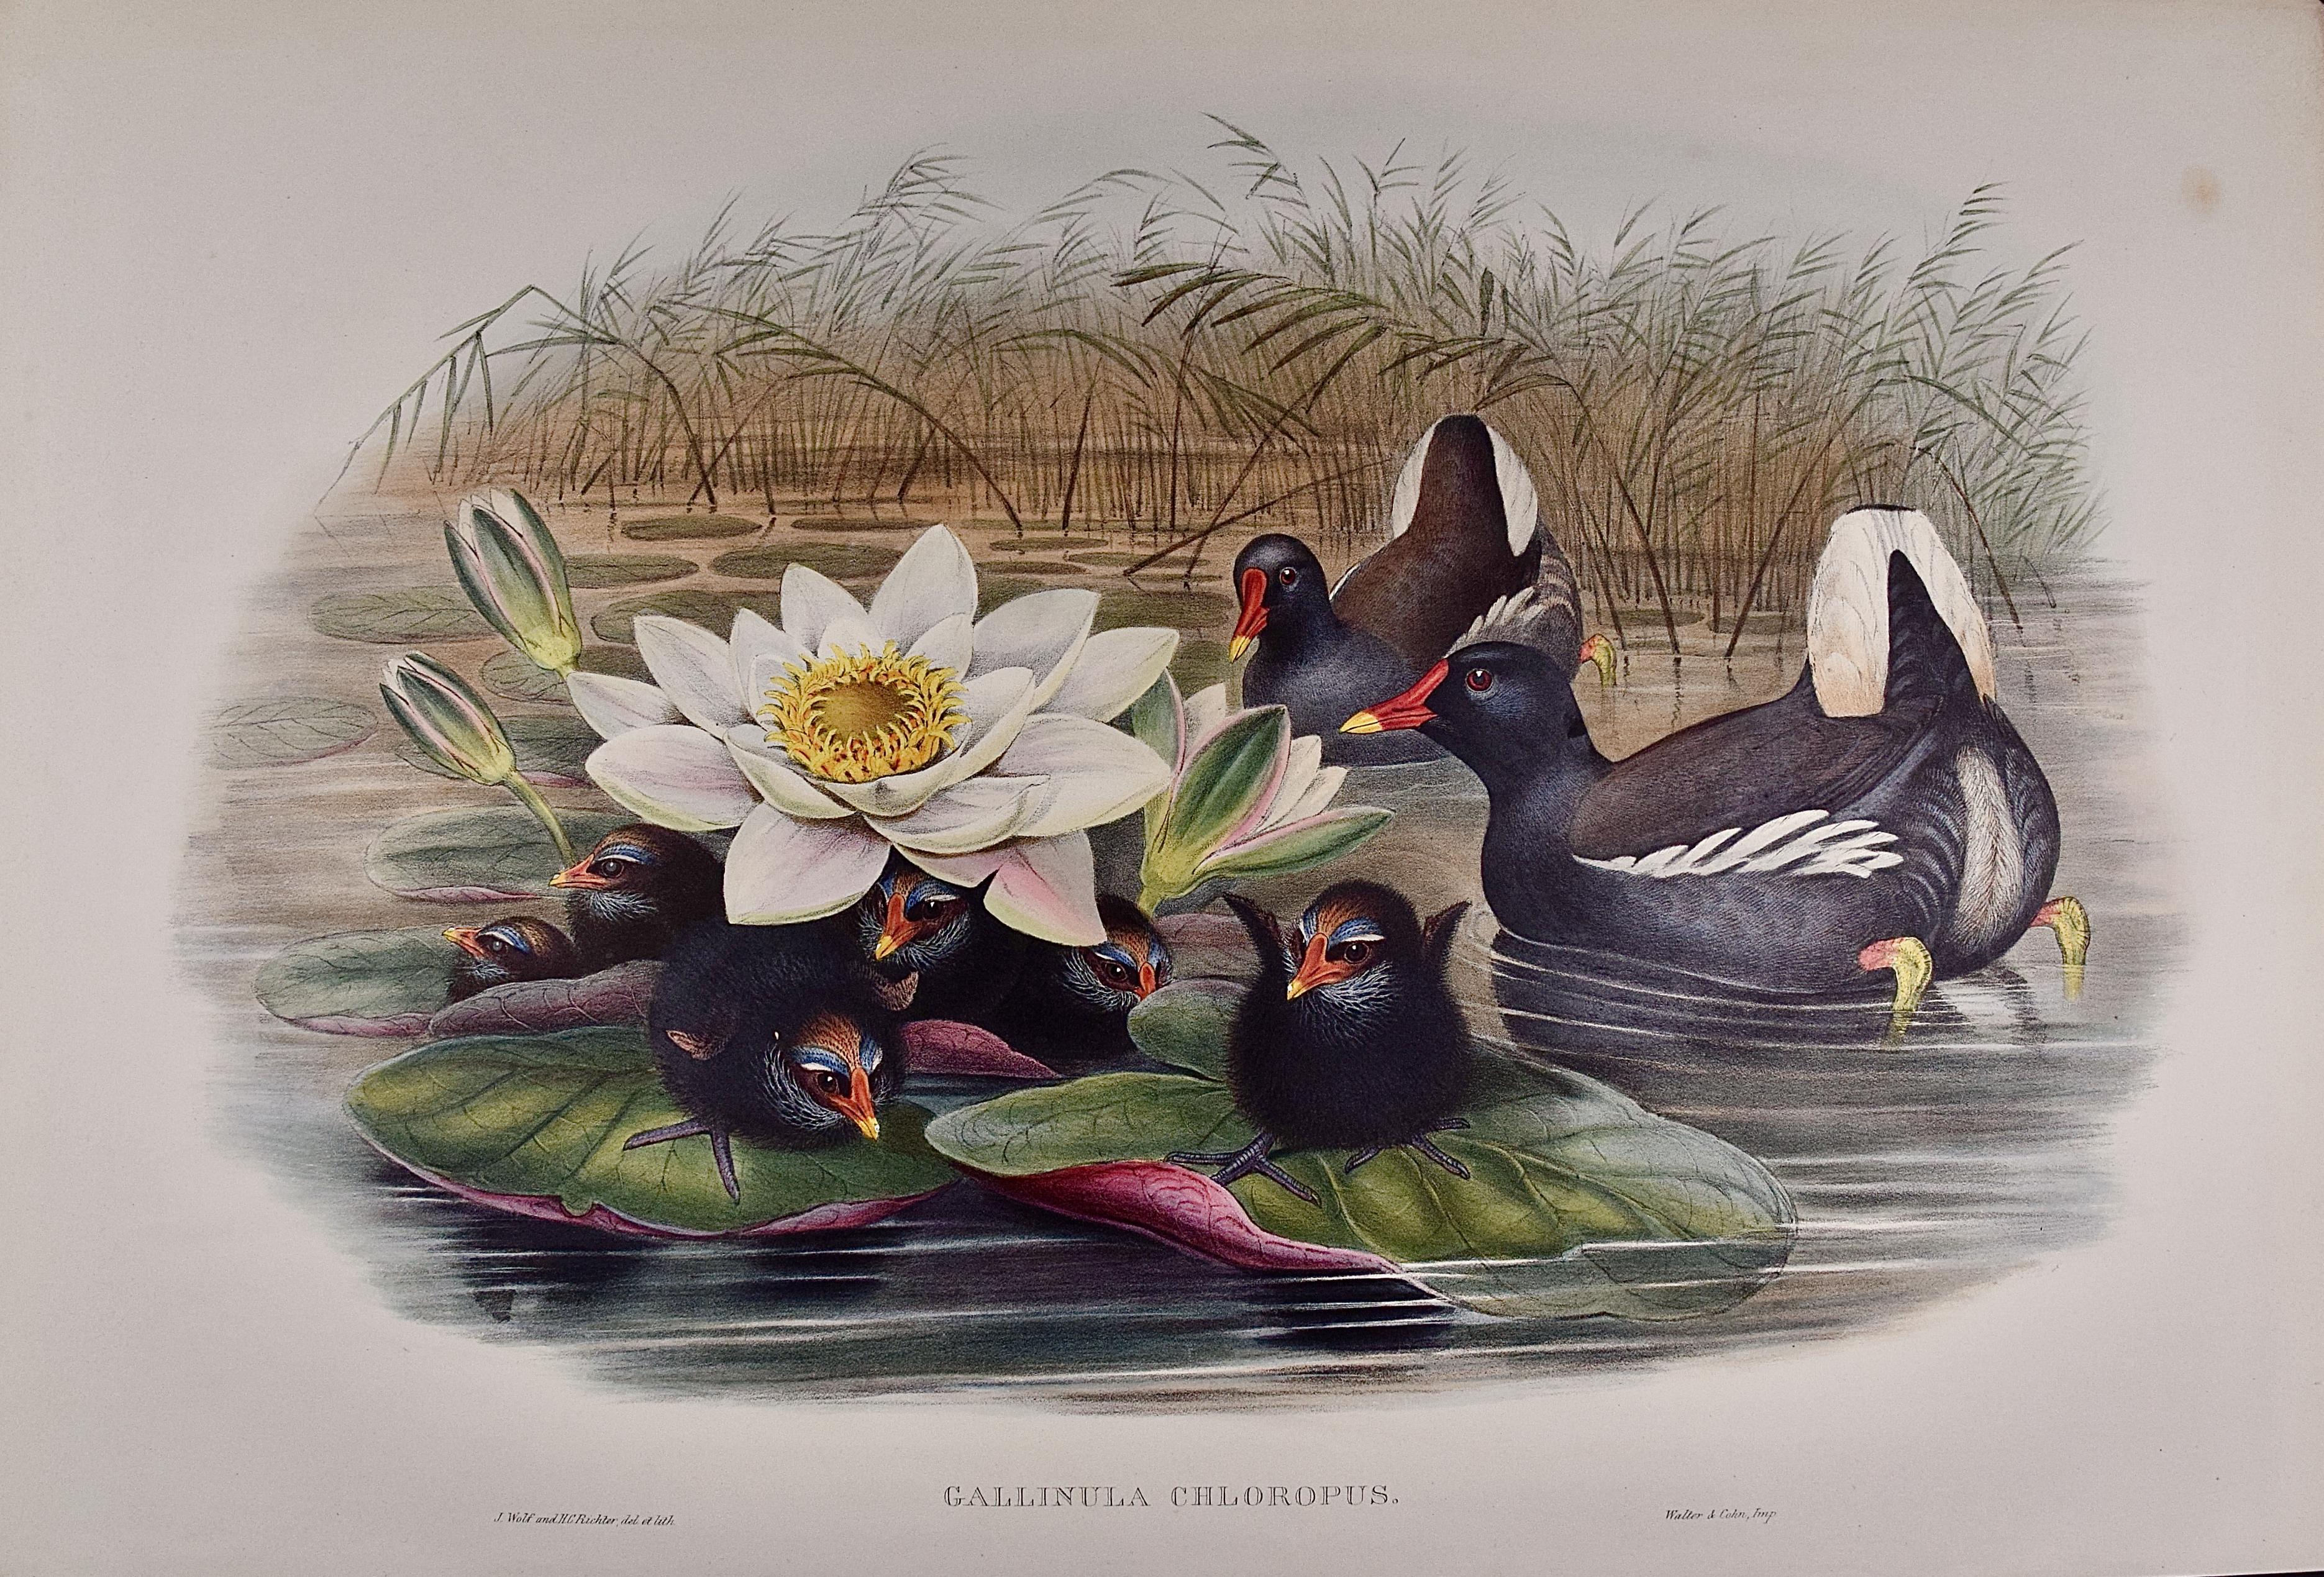 A Family of Moorhens & Lilly Pad: A 19th C. Hand-colored Lithograph by Gould - Print by John Gould and Henry Constantine Richter